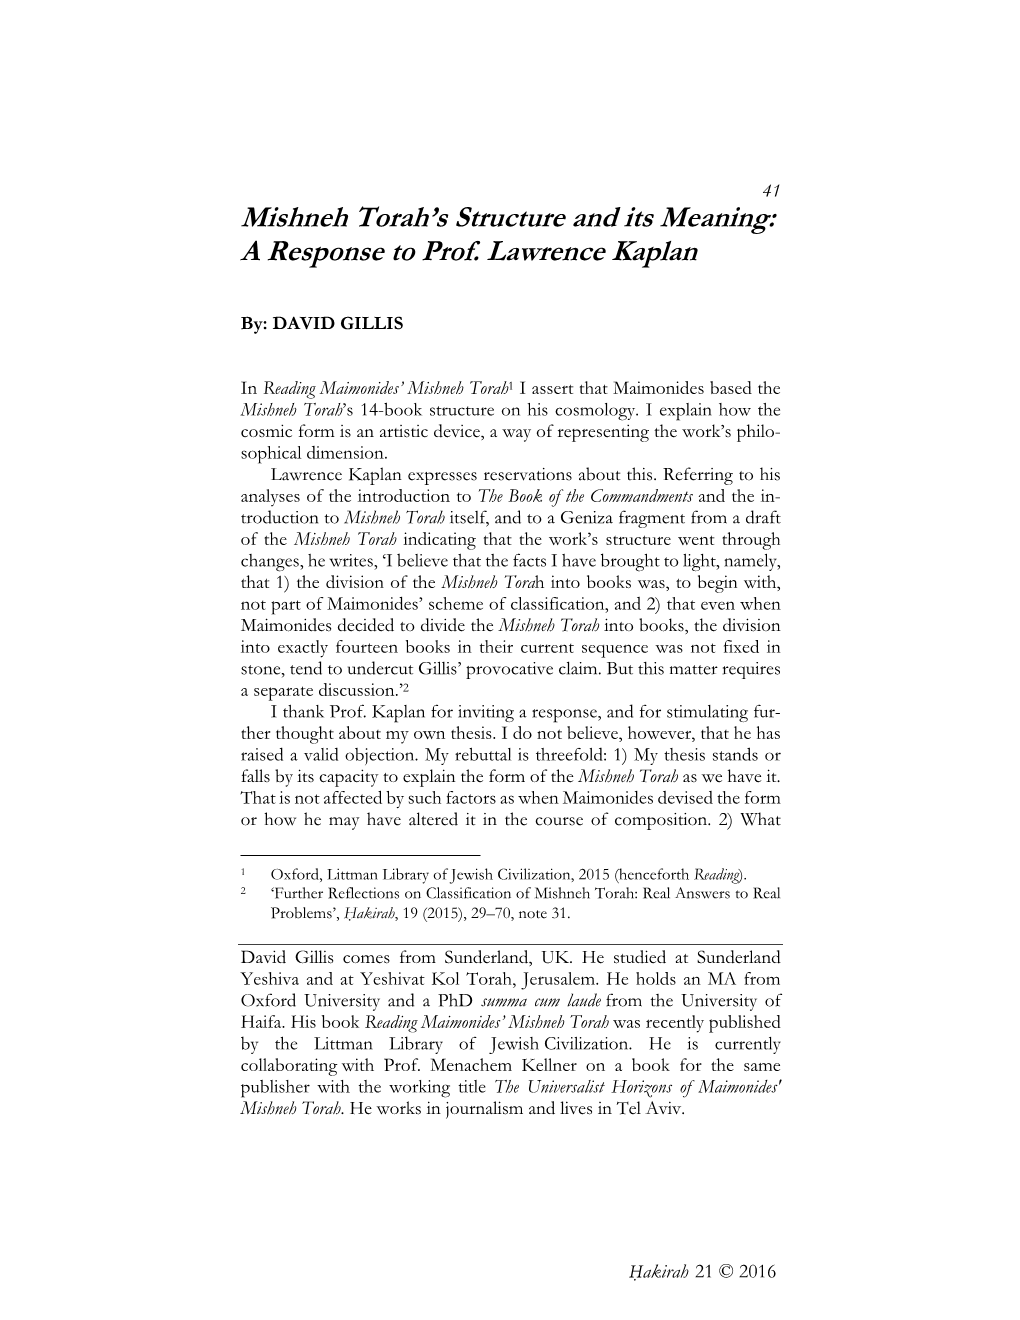 Mishneh Torah's Structure and Its Meaning: a Response To